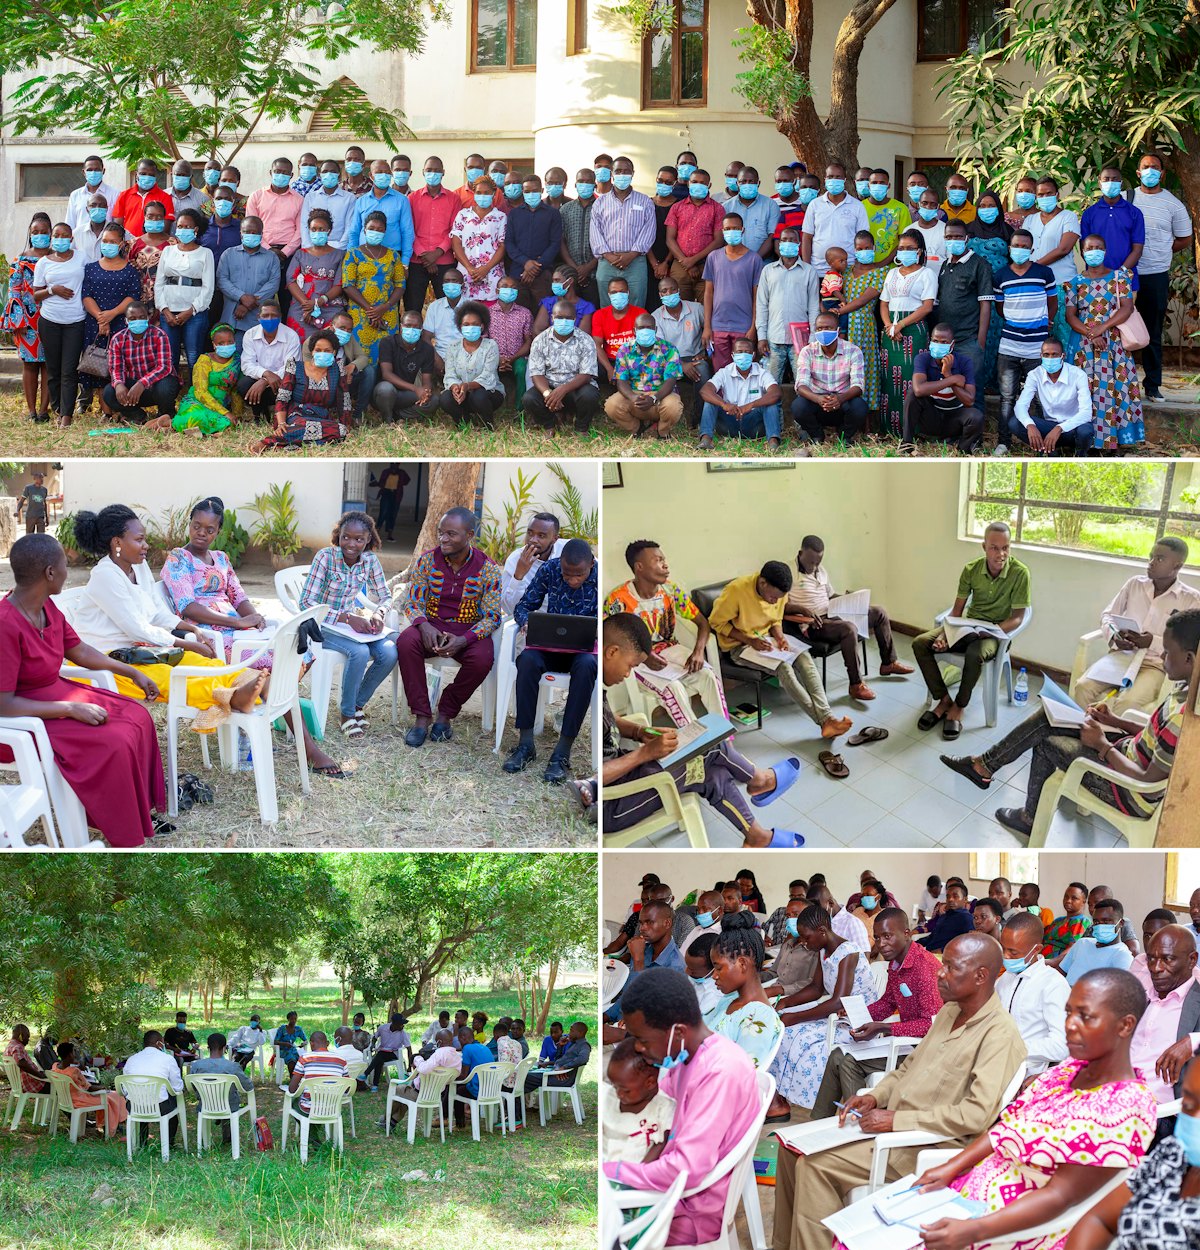 Shown here are two gatherings held in Tanzania